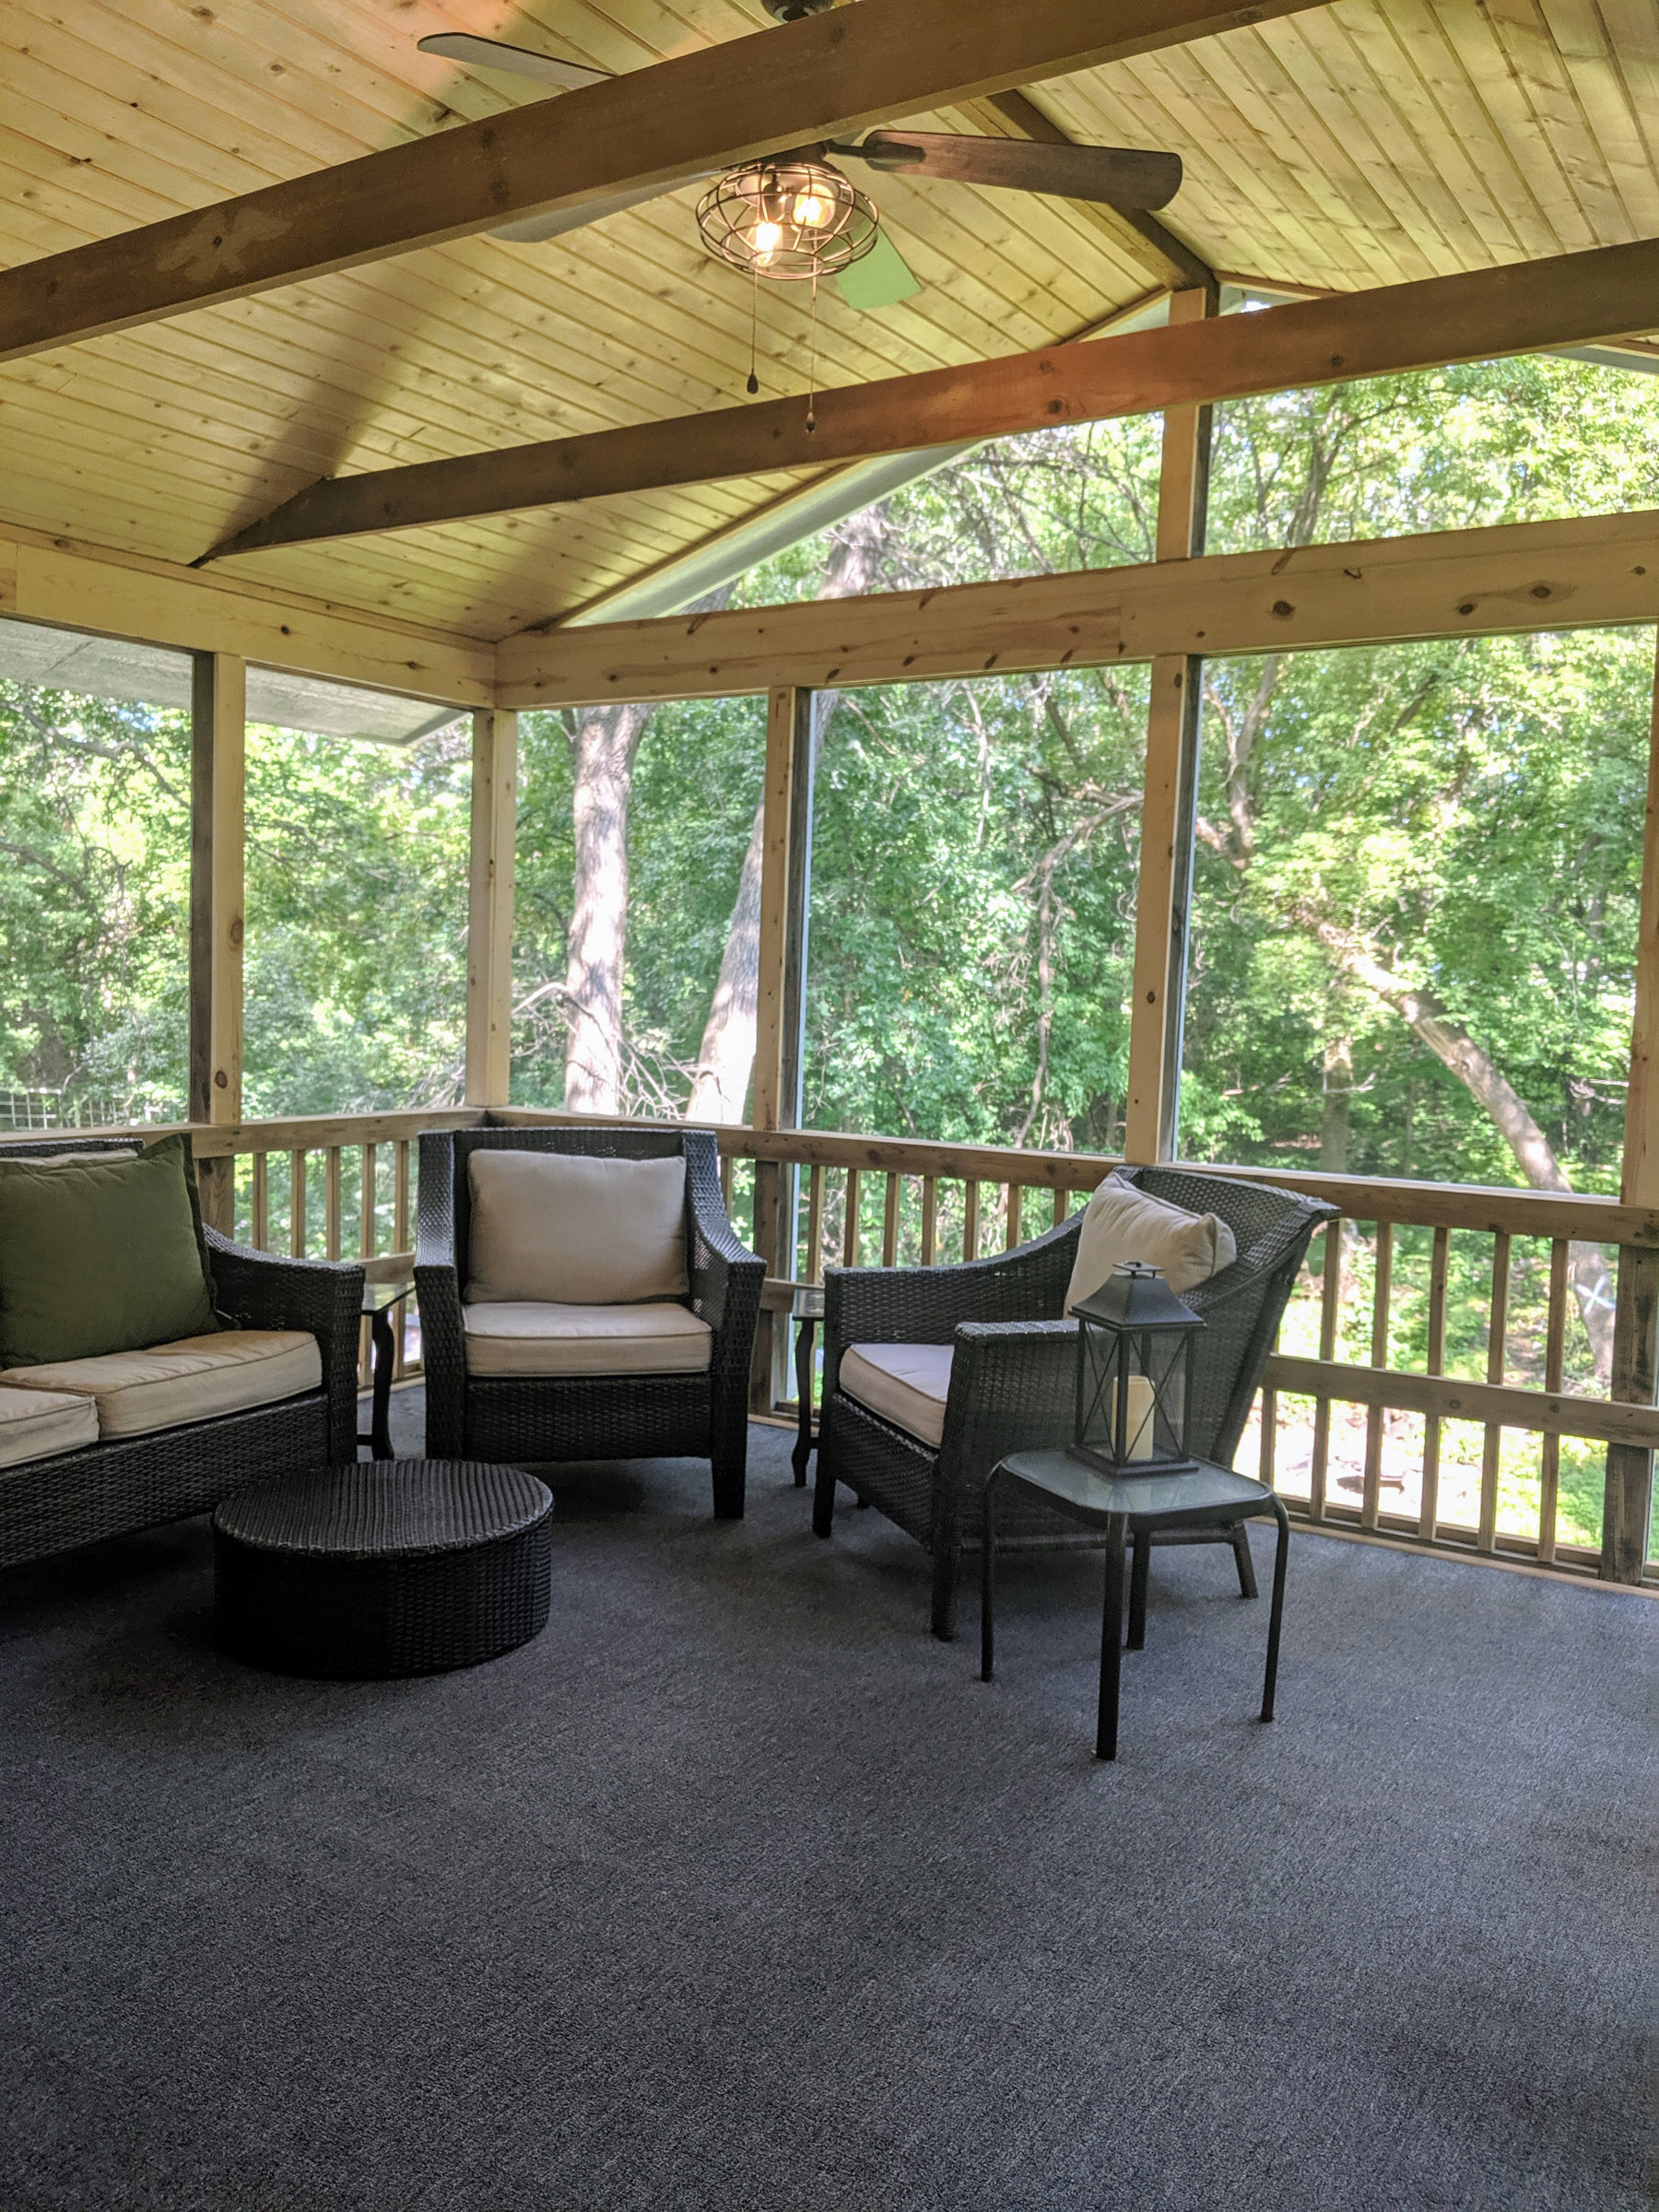 Re-newed the existing screen porch & deck